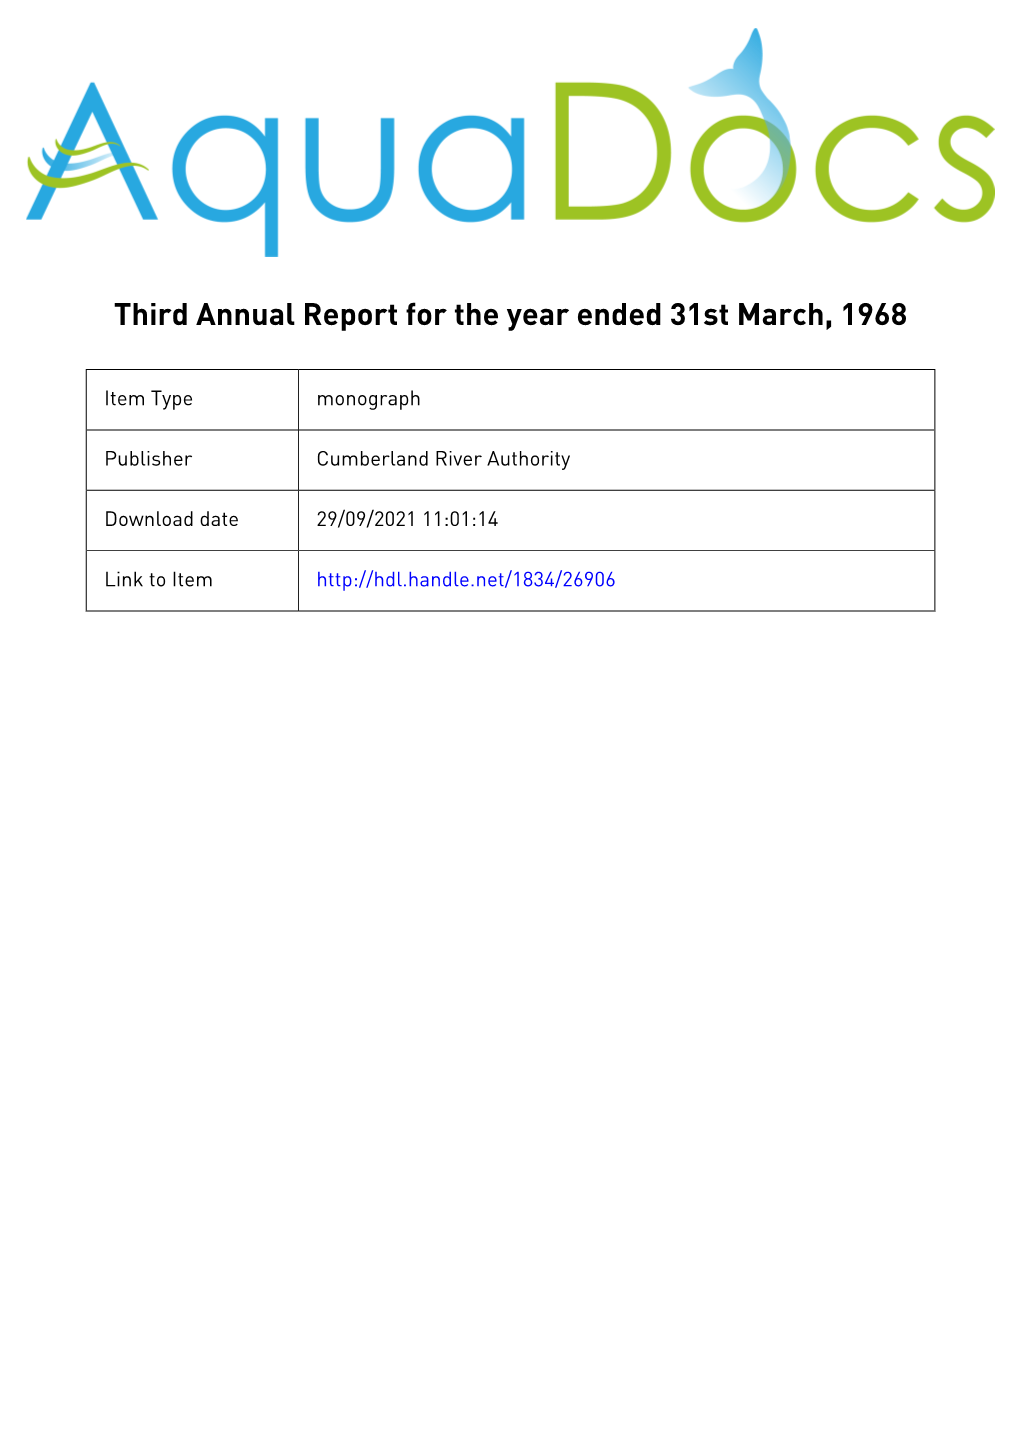 Annual Report for the Year Ended 31St March, 1968